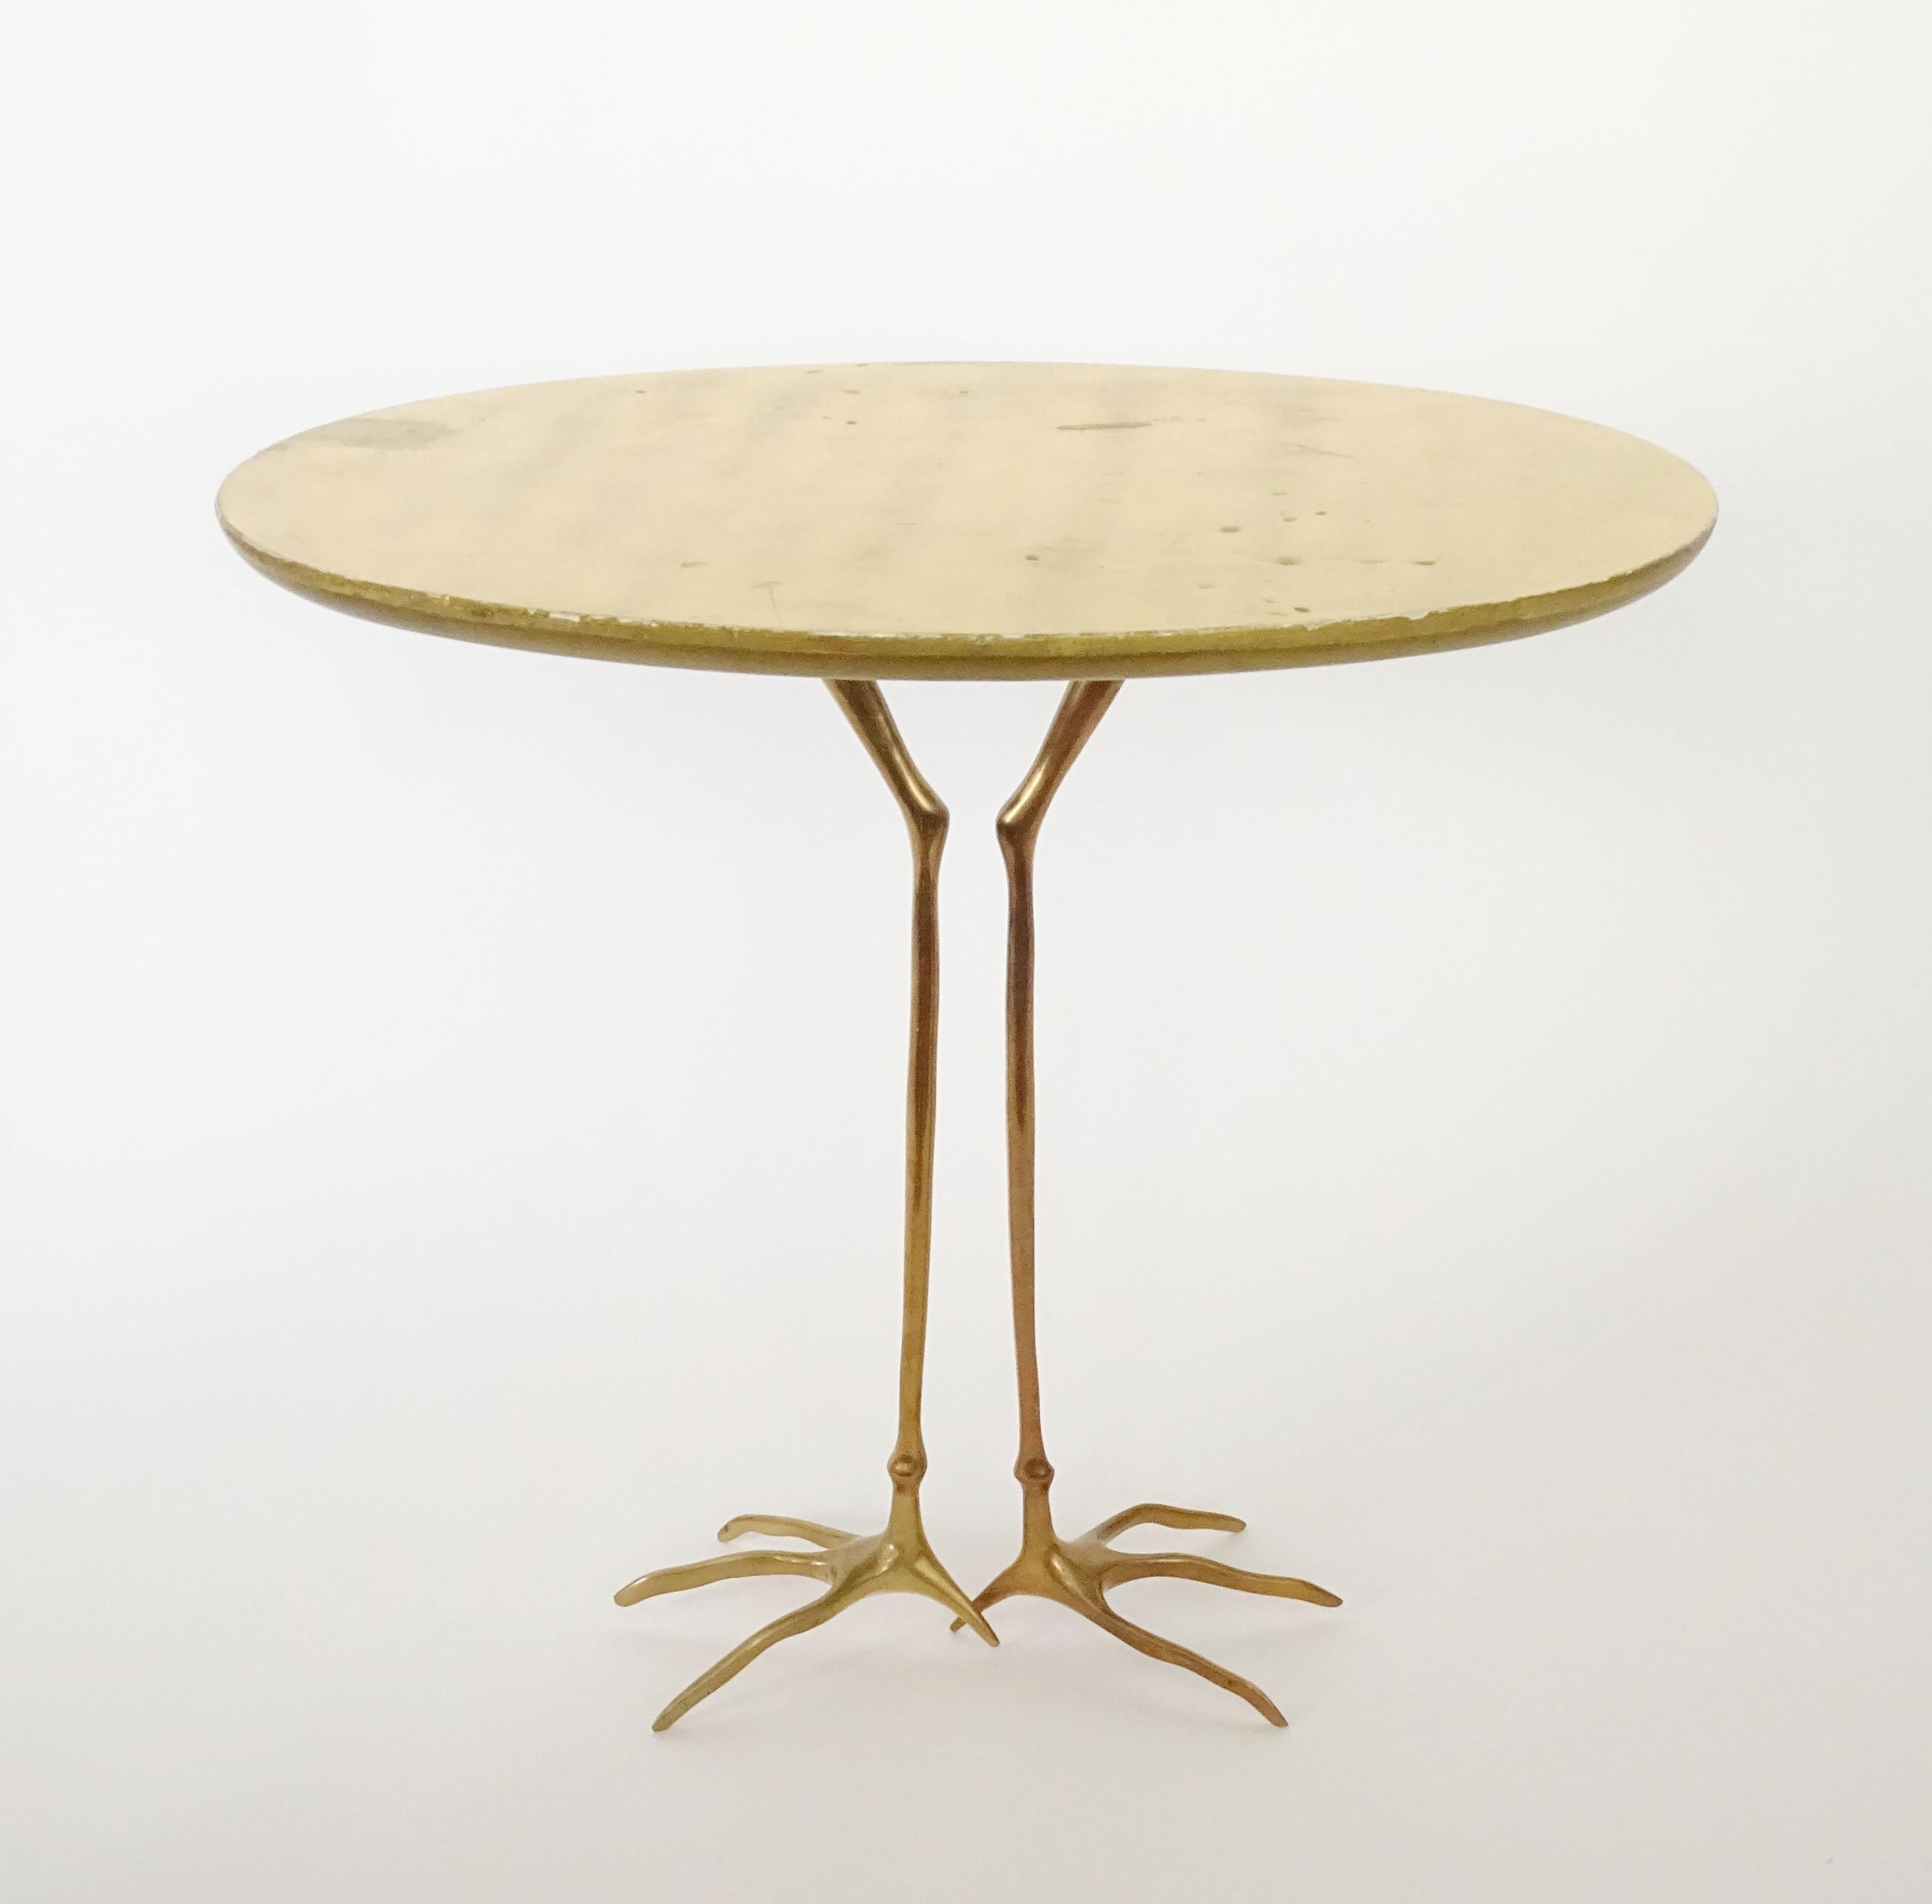 Meret Oppenheim Traccia side table by Simon Gavina 1972

Designed by Meret Oppenheim in 1939 and produced by Simon Gavina in 1972
Gold leaf wooden top with bird footprints.